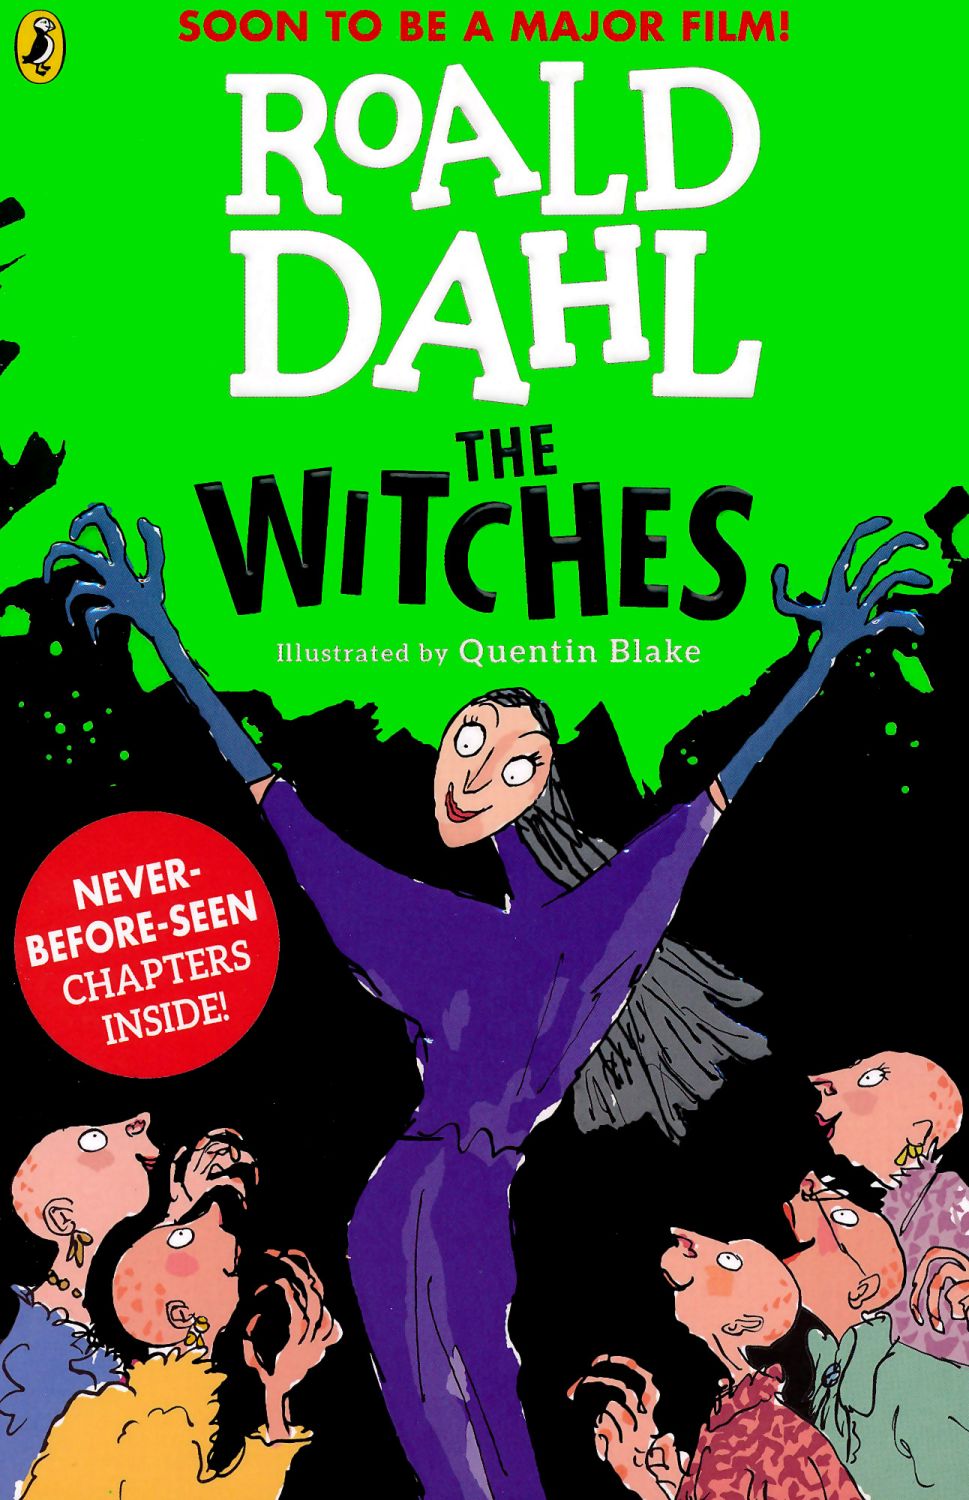 the witches by roald dahl book review